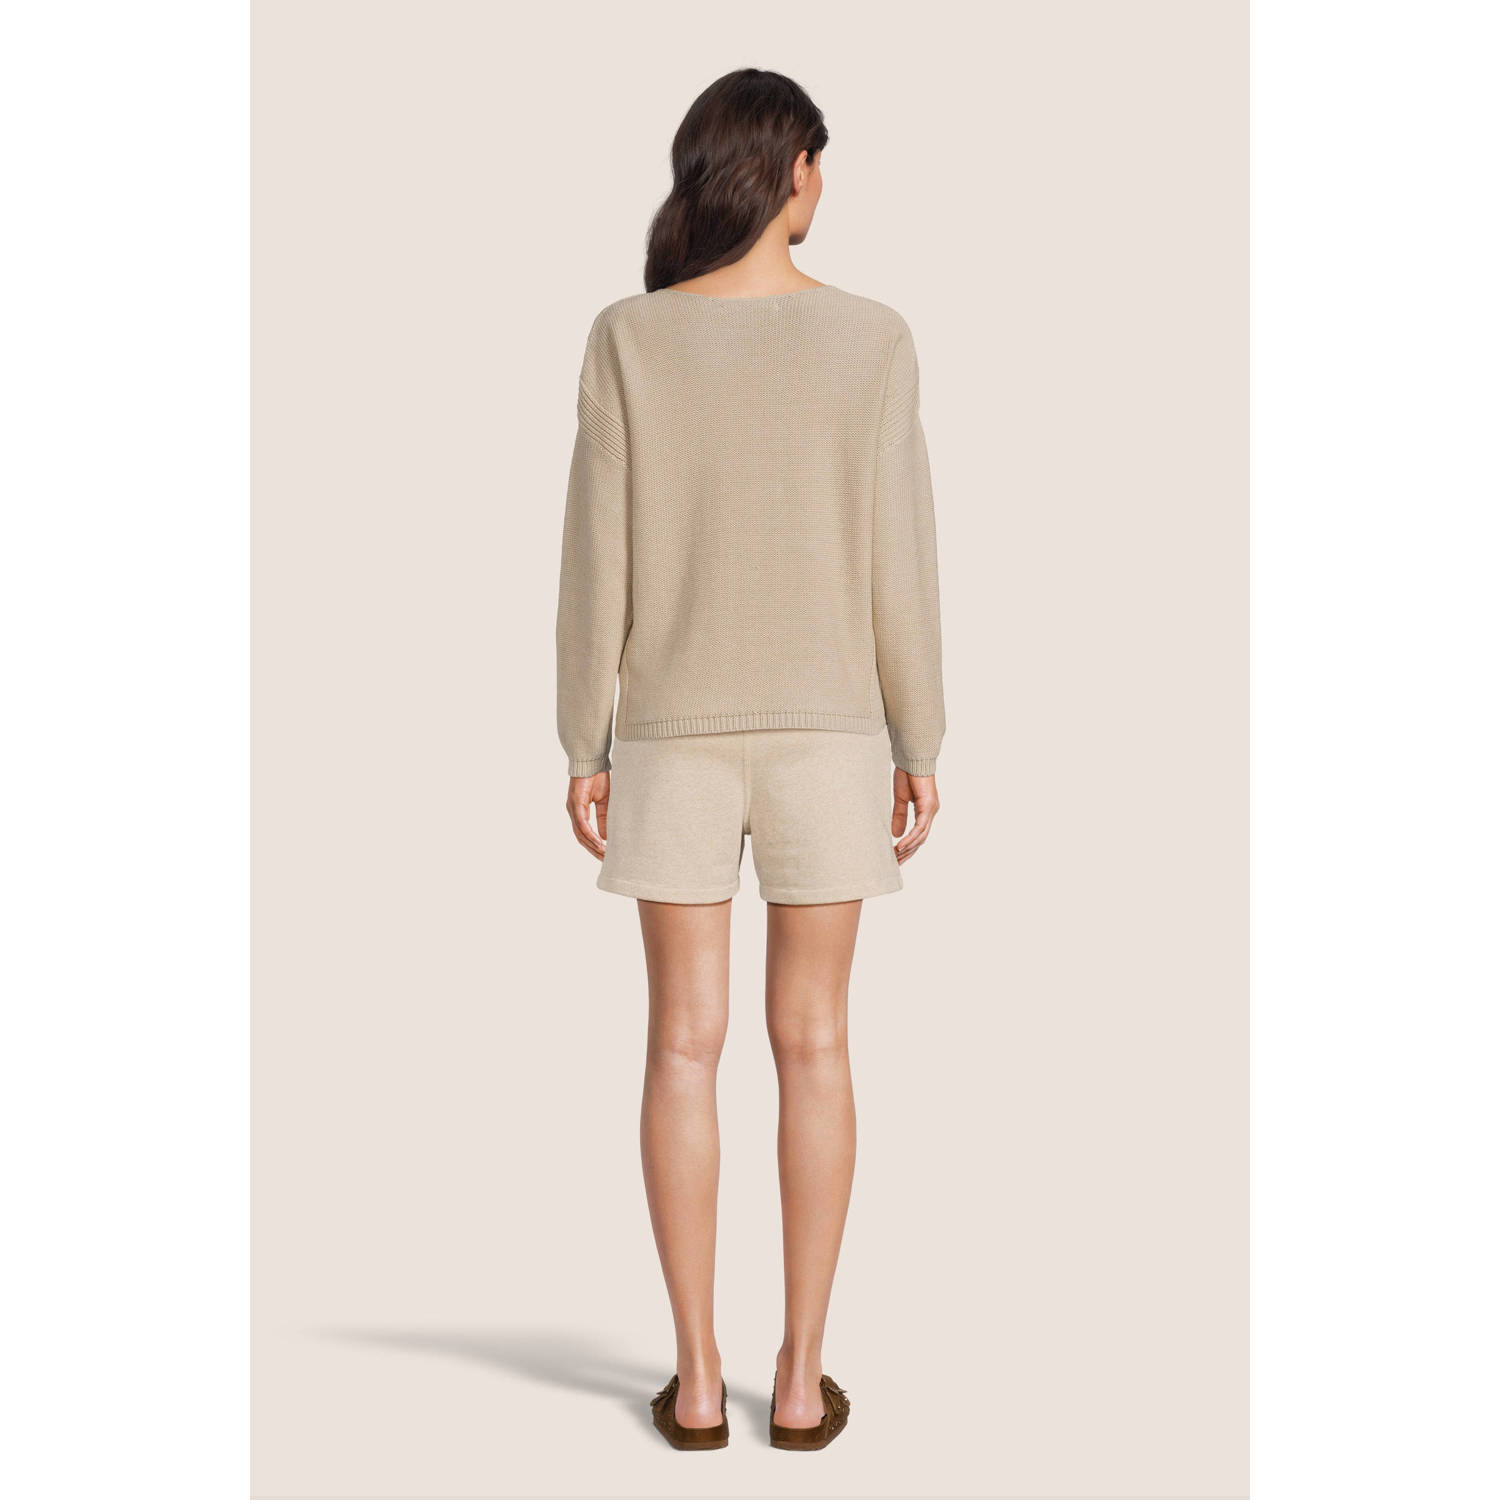 Moscow relaxed short beige